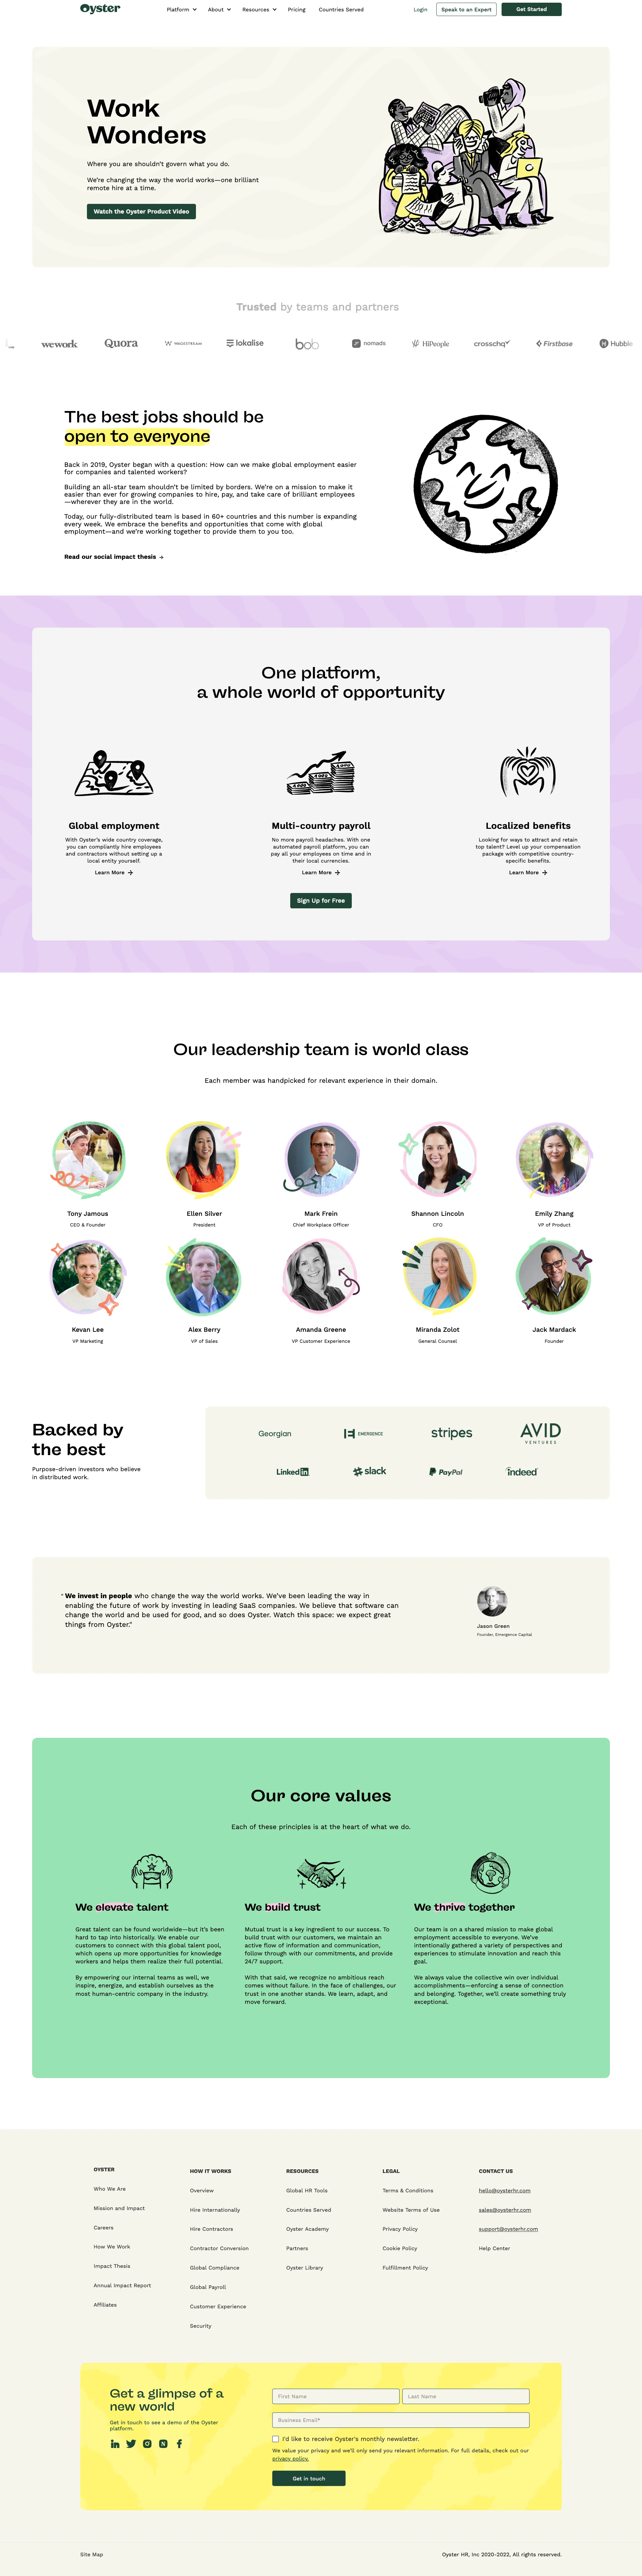 Oyster Landing Page Example: Hire anywhere, thrive everywhere. Meet your trusted partner for expanding teams across borders. Hire, pay, and care for talent around the world with Oyster.